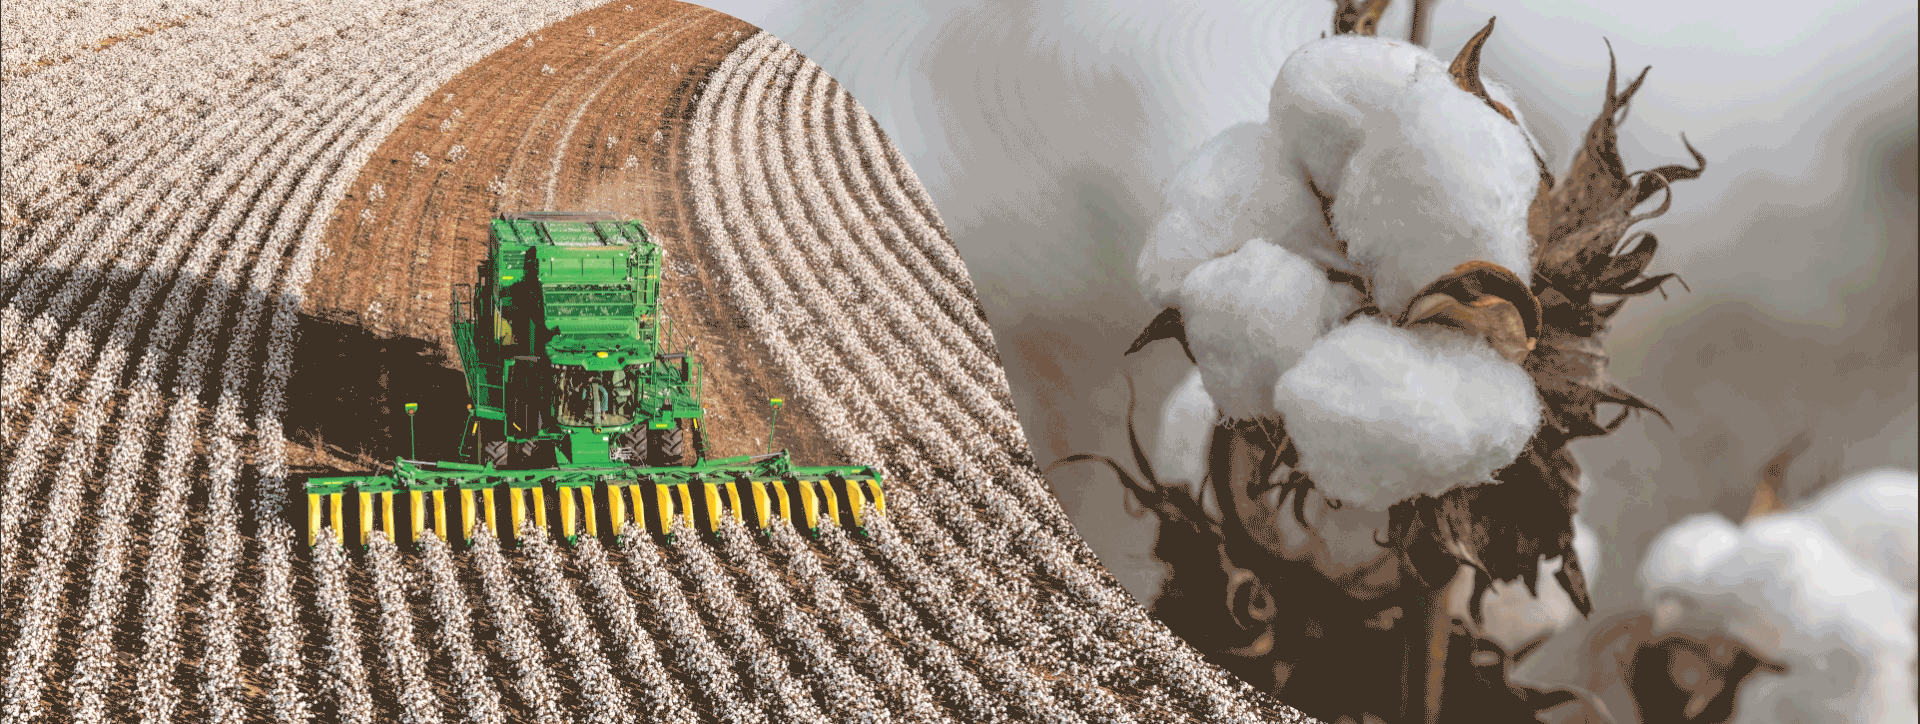 Collage showing a top view of a cotton field and a closeup of a cotton bud.